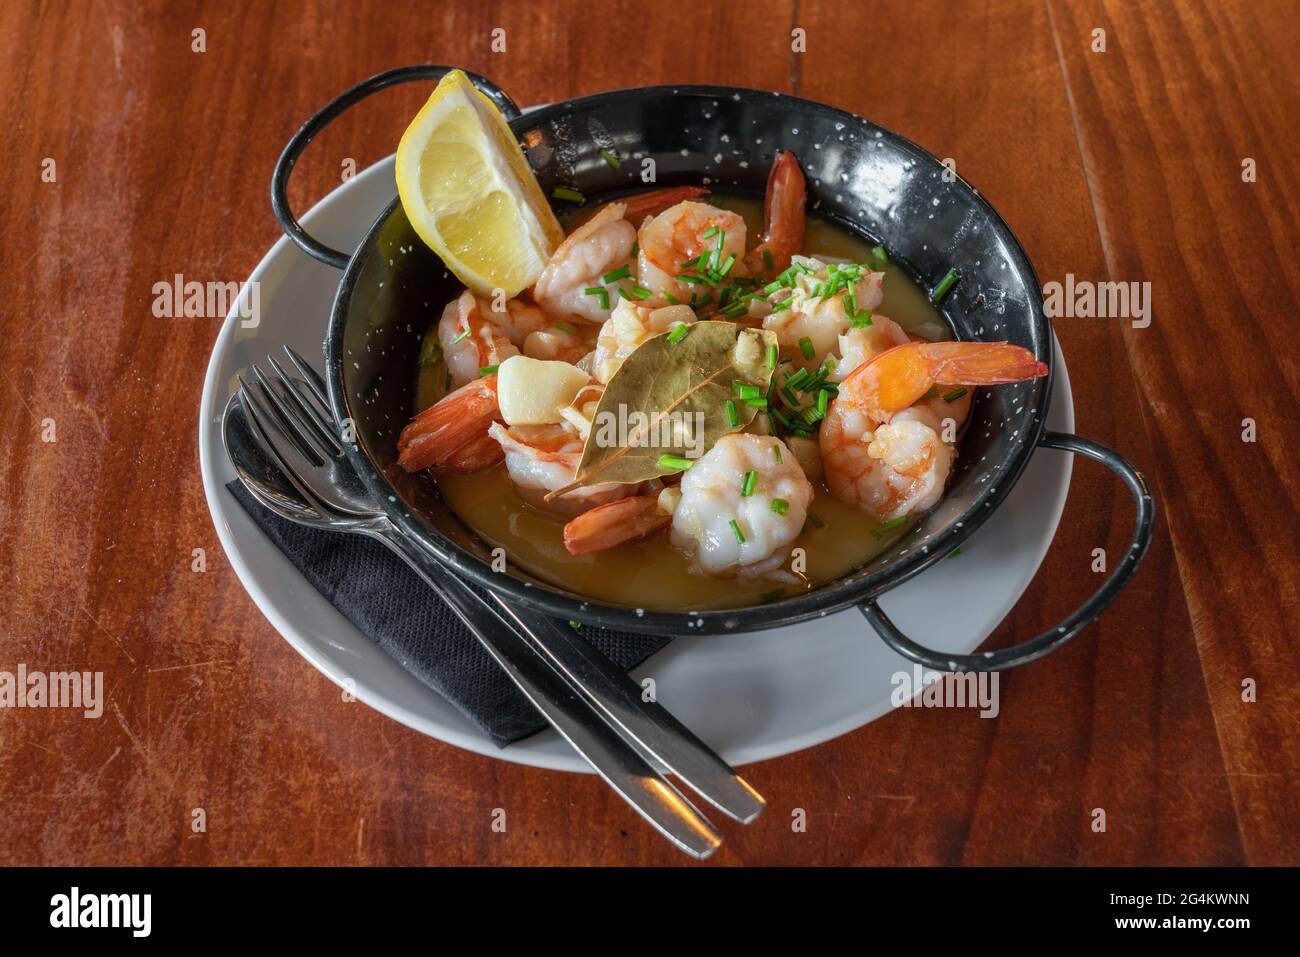 Shrimps in a metal plate stewed in sauce with a slice of lemon. Traditional Portuguese cuisine. Mediterranean Culture. Top view. Stock Photo